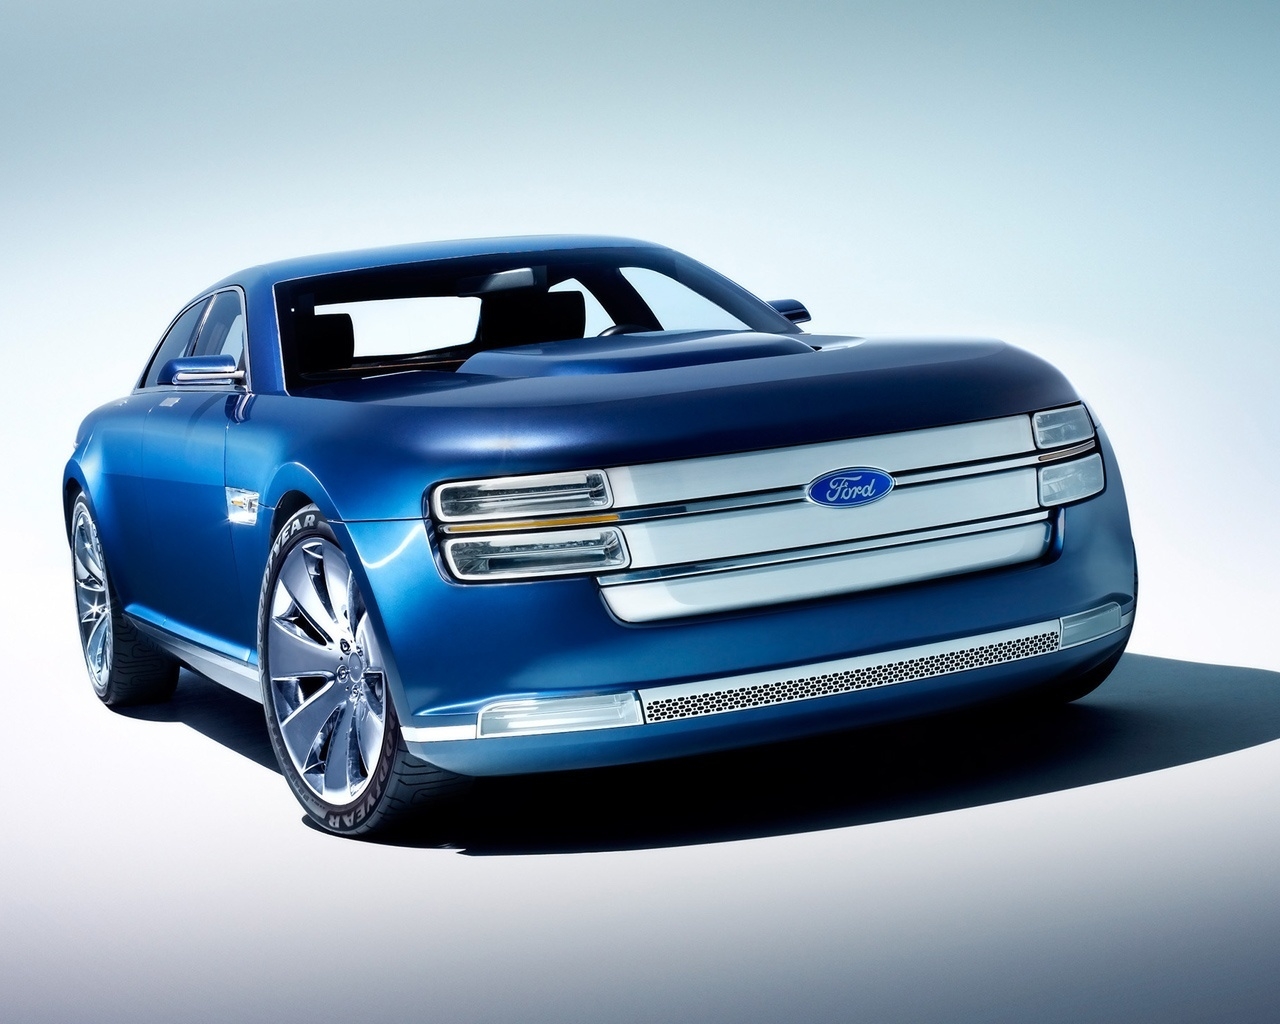 Ford Interceptor Concept for 1280 x 1024 resolution